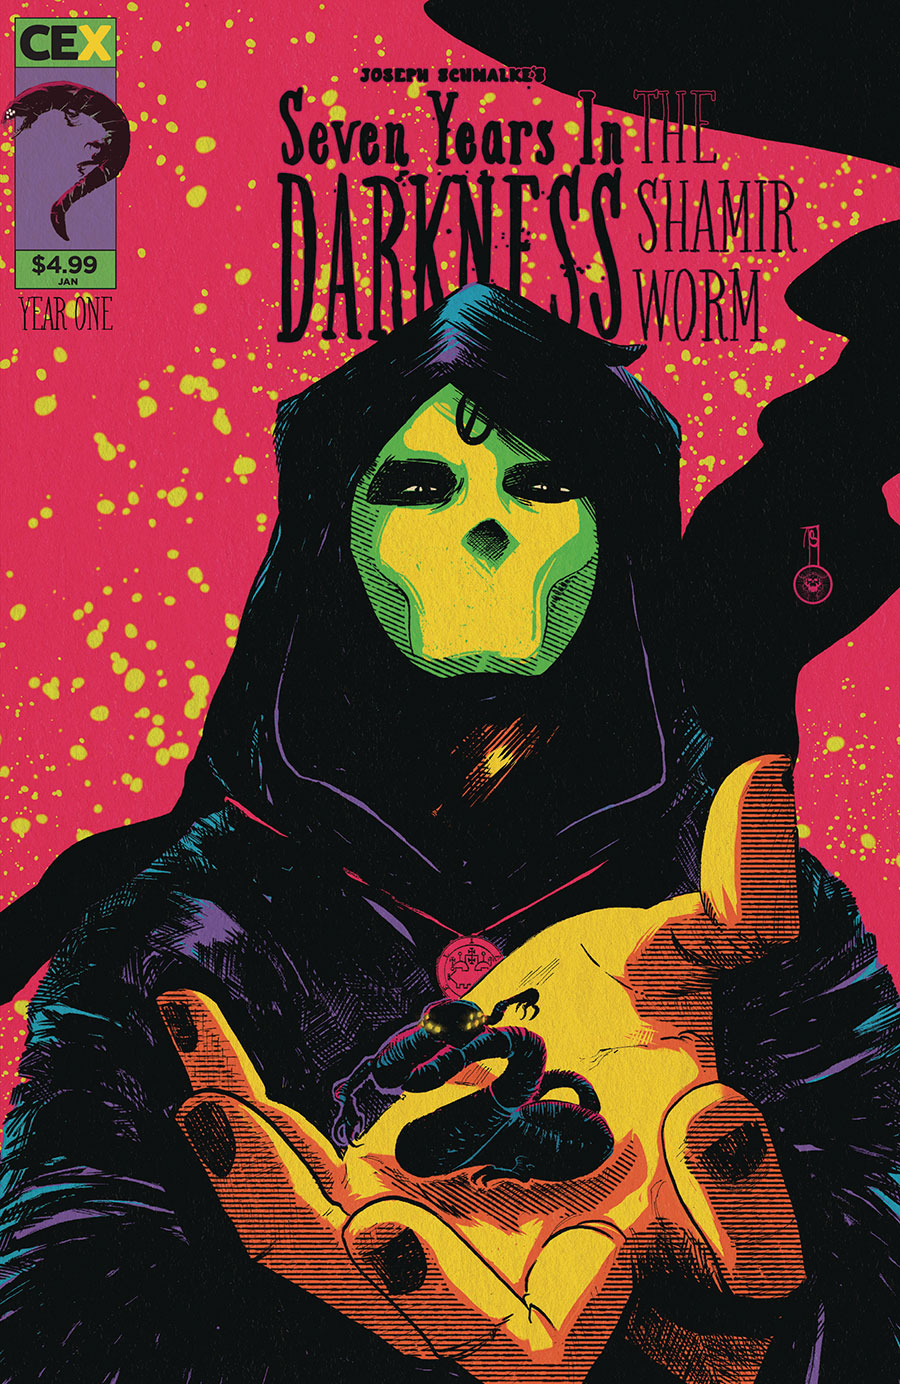 Seven Years In Darkness Shamir Worm #1 (One Shot) Cover B Variant Joseph Schmalke Cover